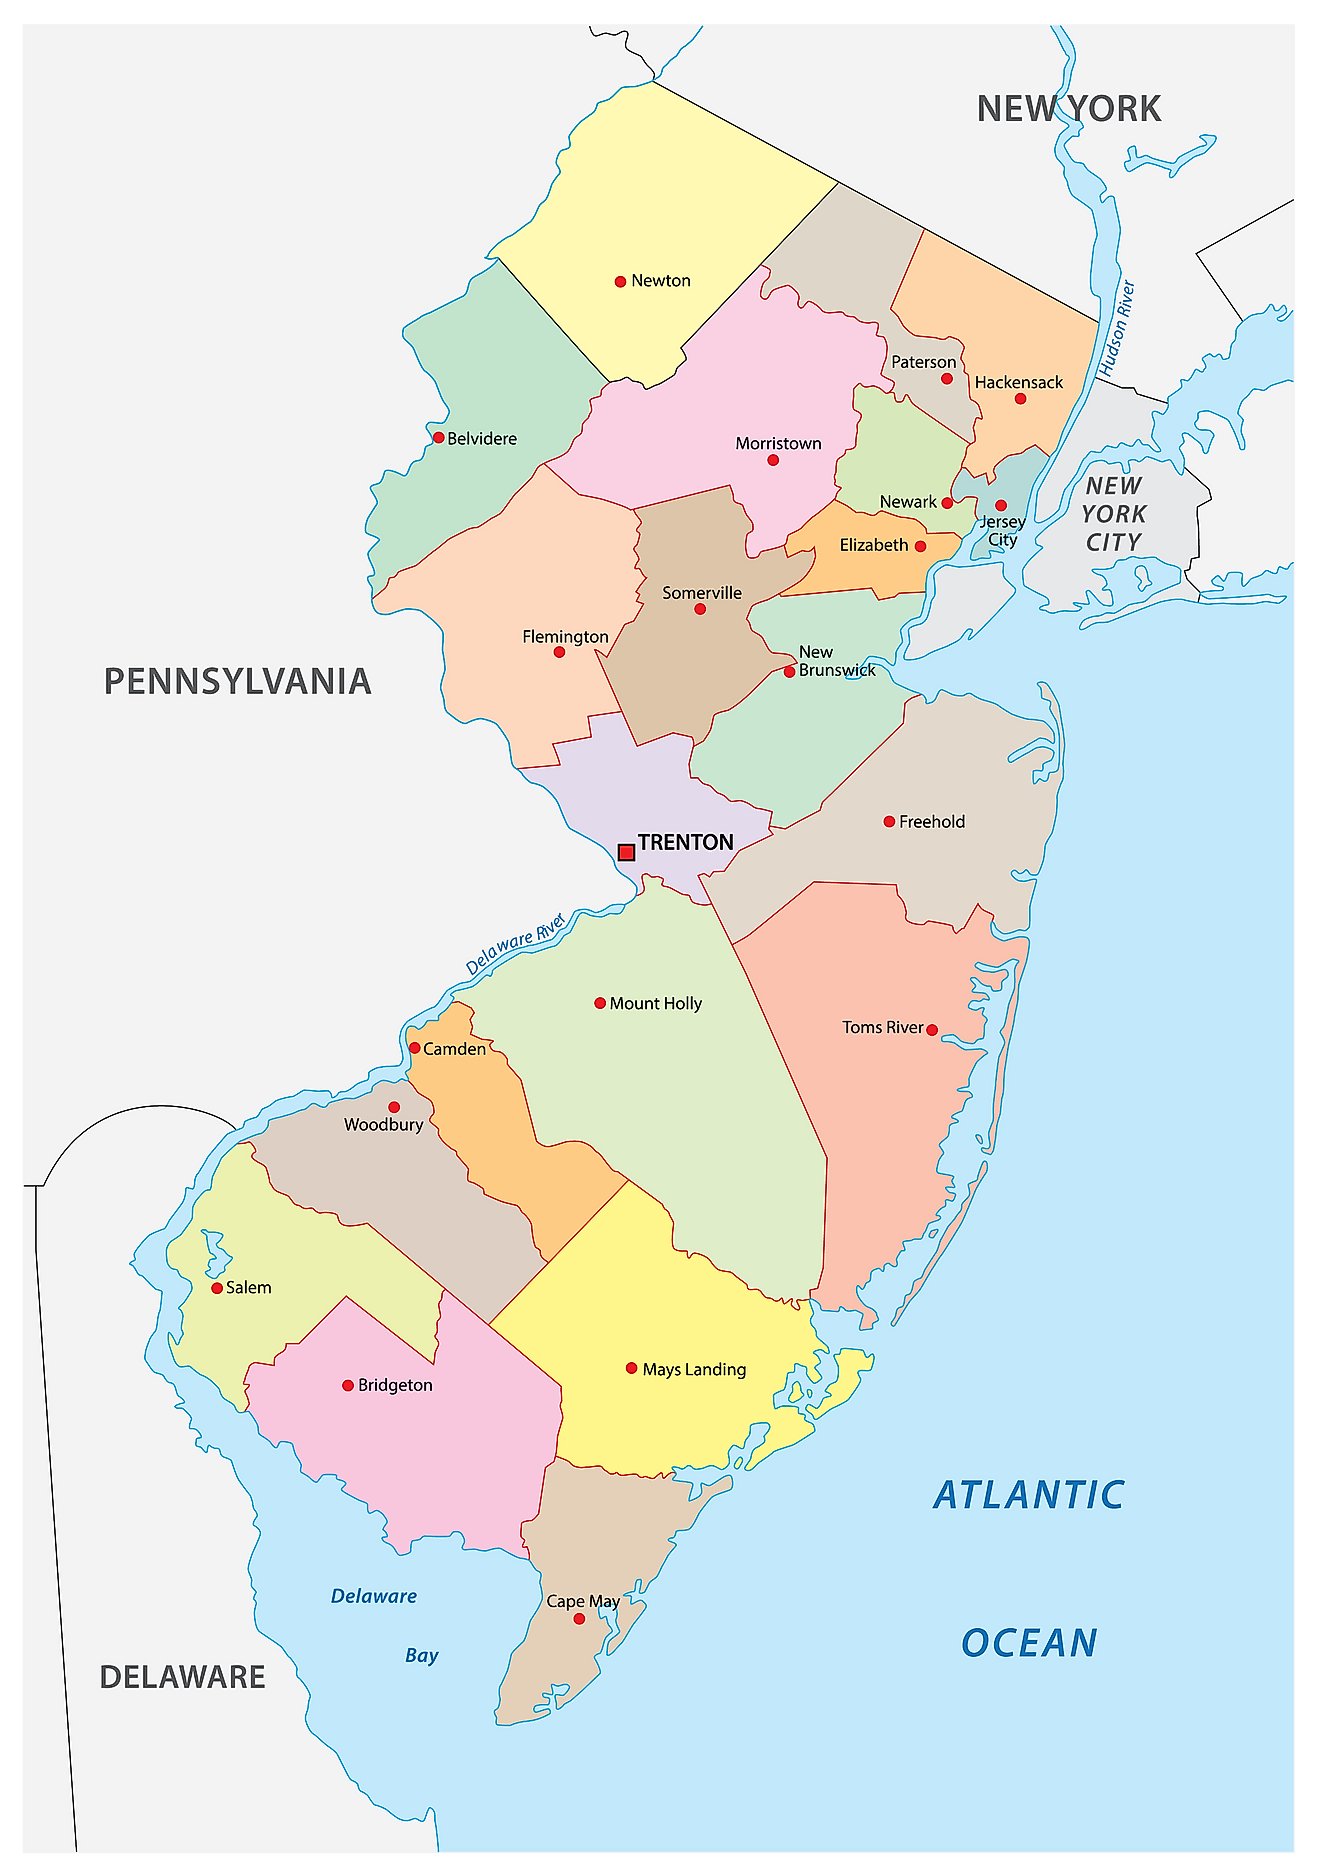 New Jersey Capital, Population, Map, History, Facts Britannica ...